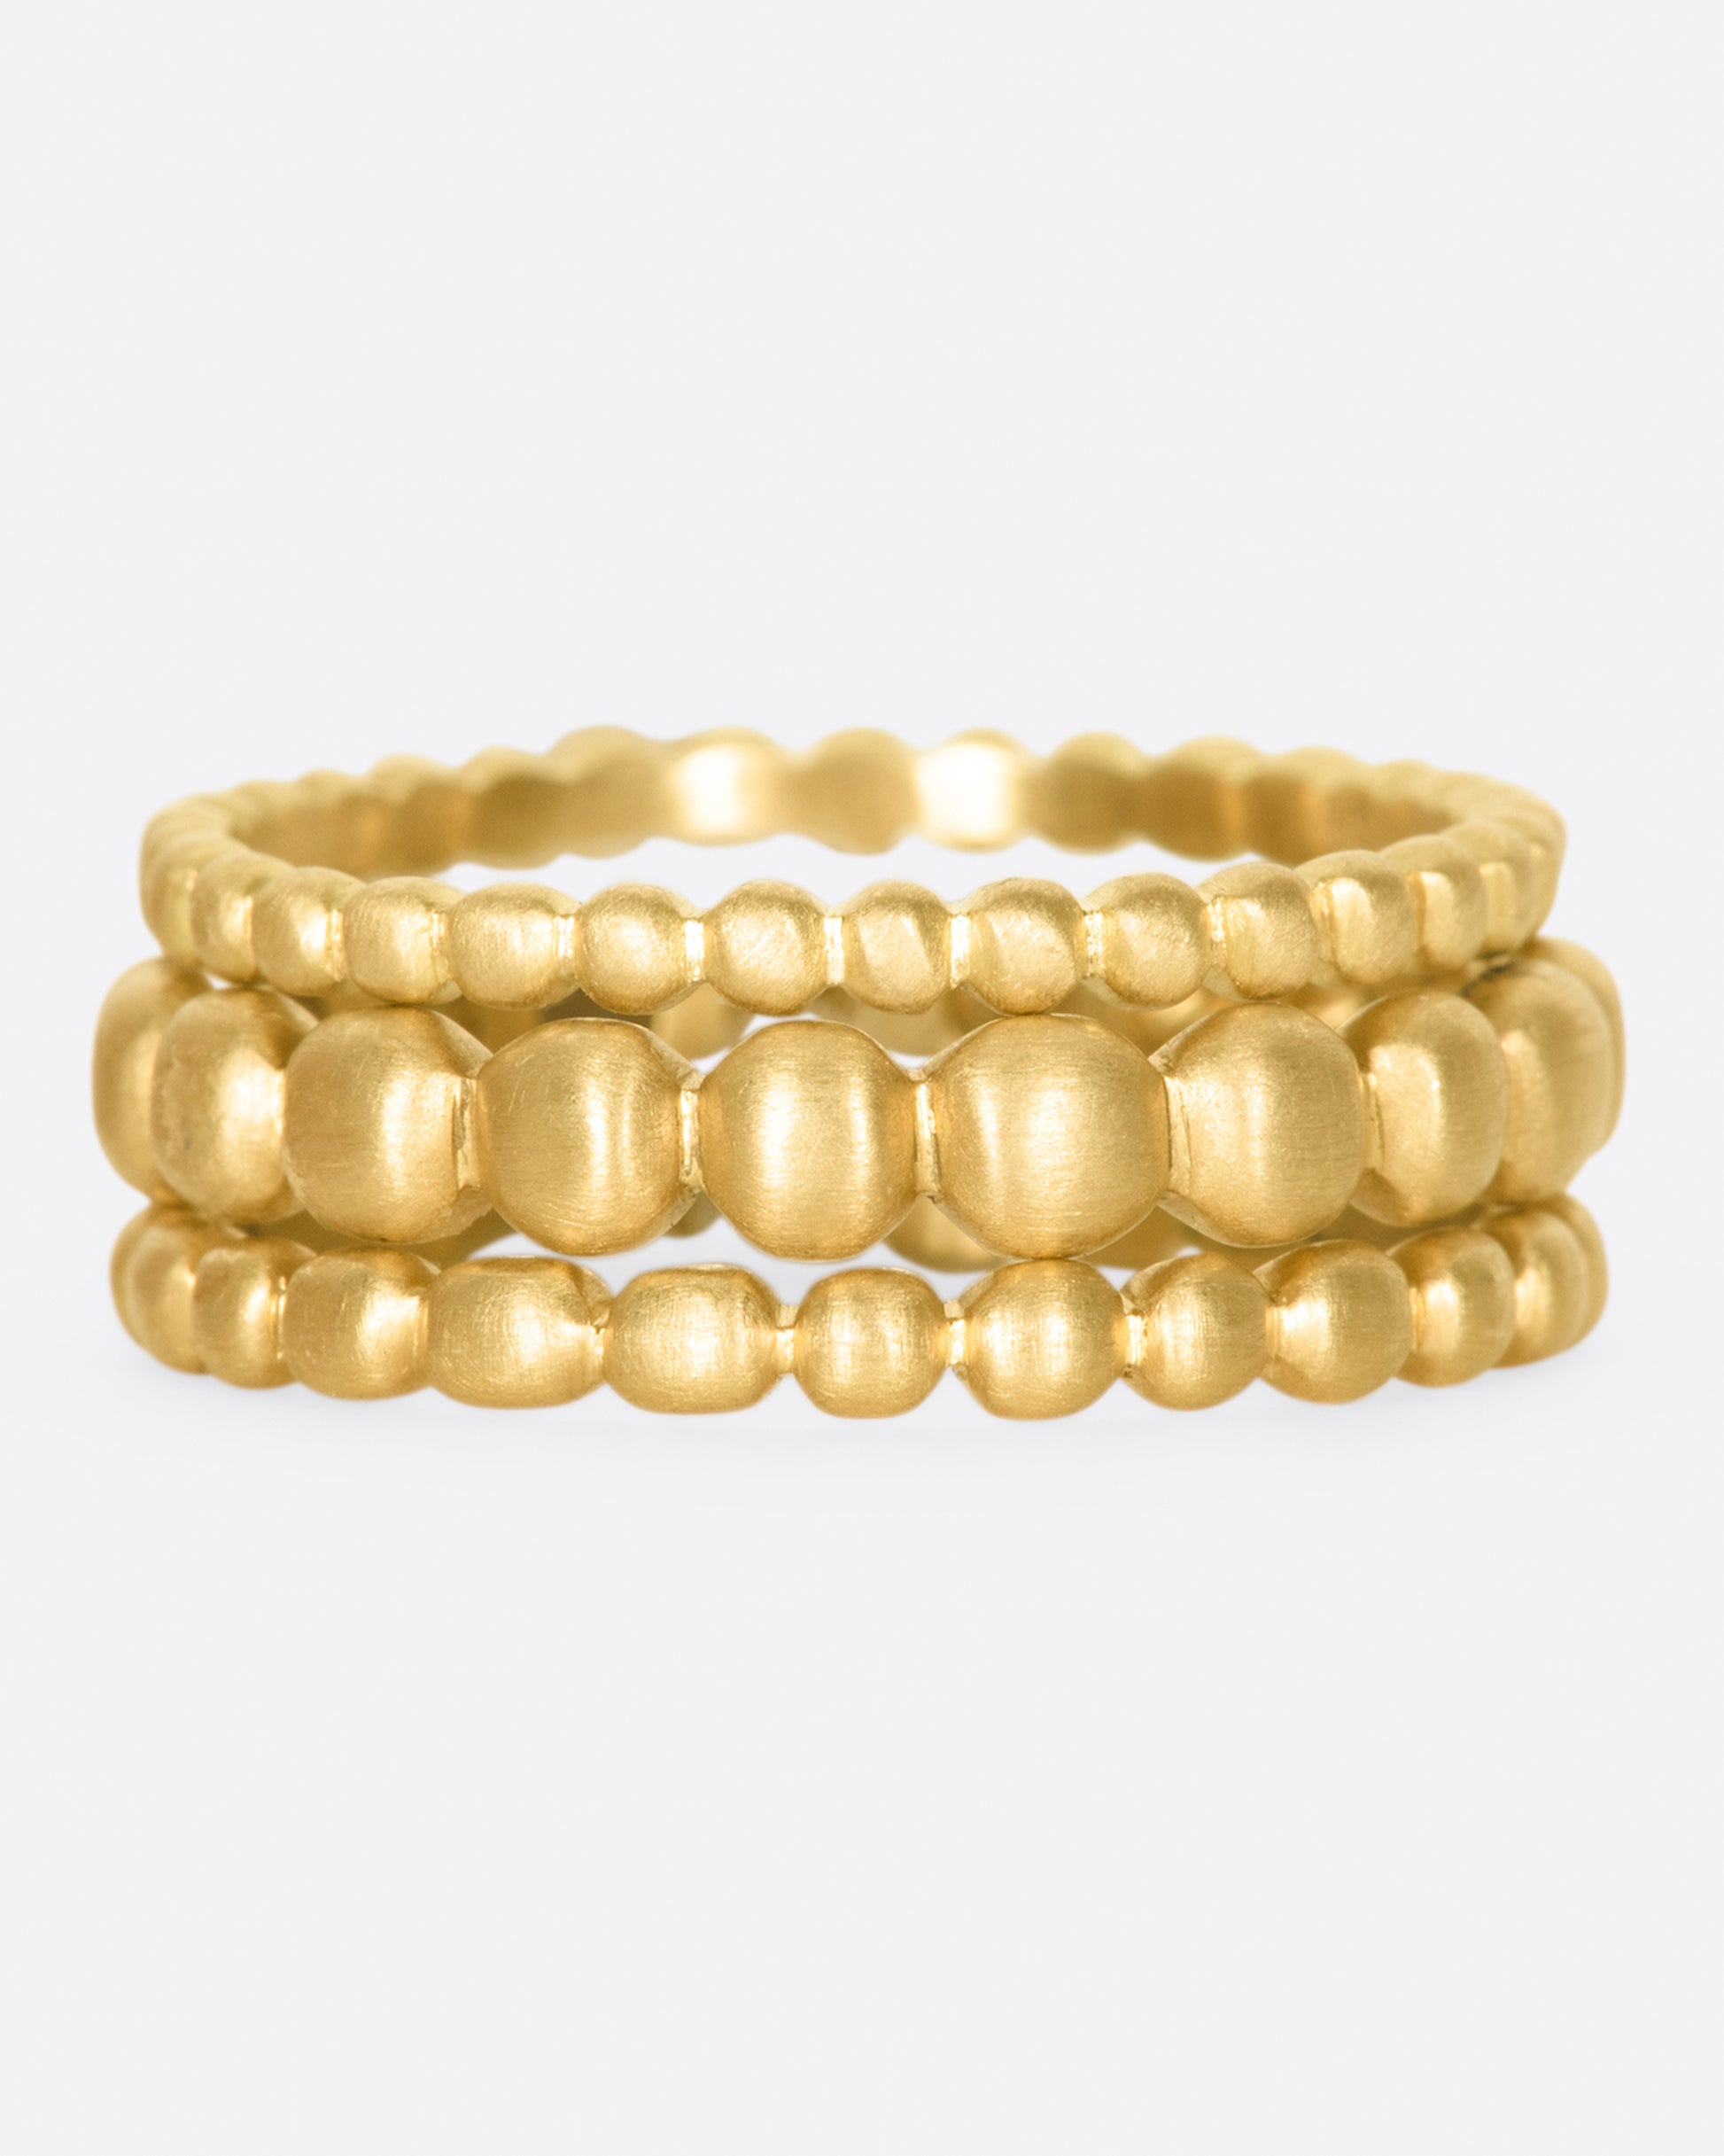 A perfect gold bubble stacking ring that adds volume and texture between your gem-heavy rings or looks great on its own. This comes in three different widths.